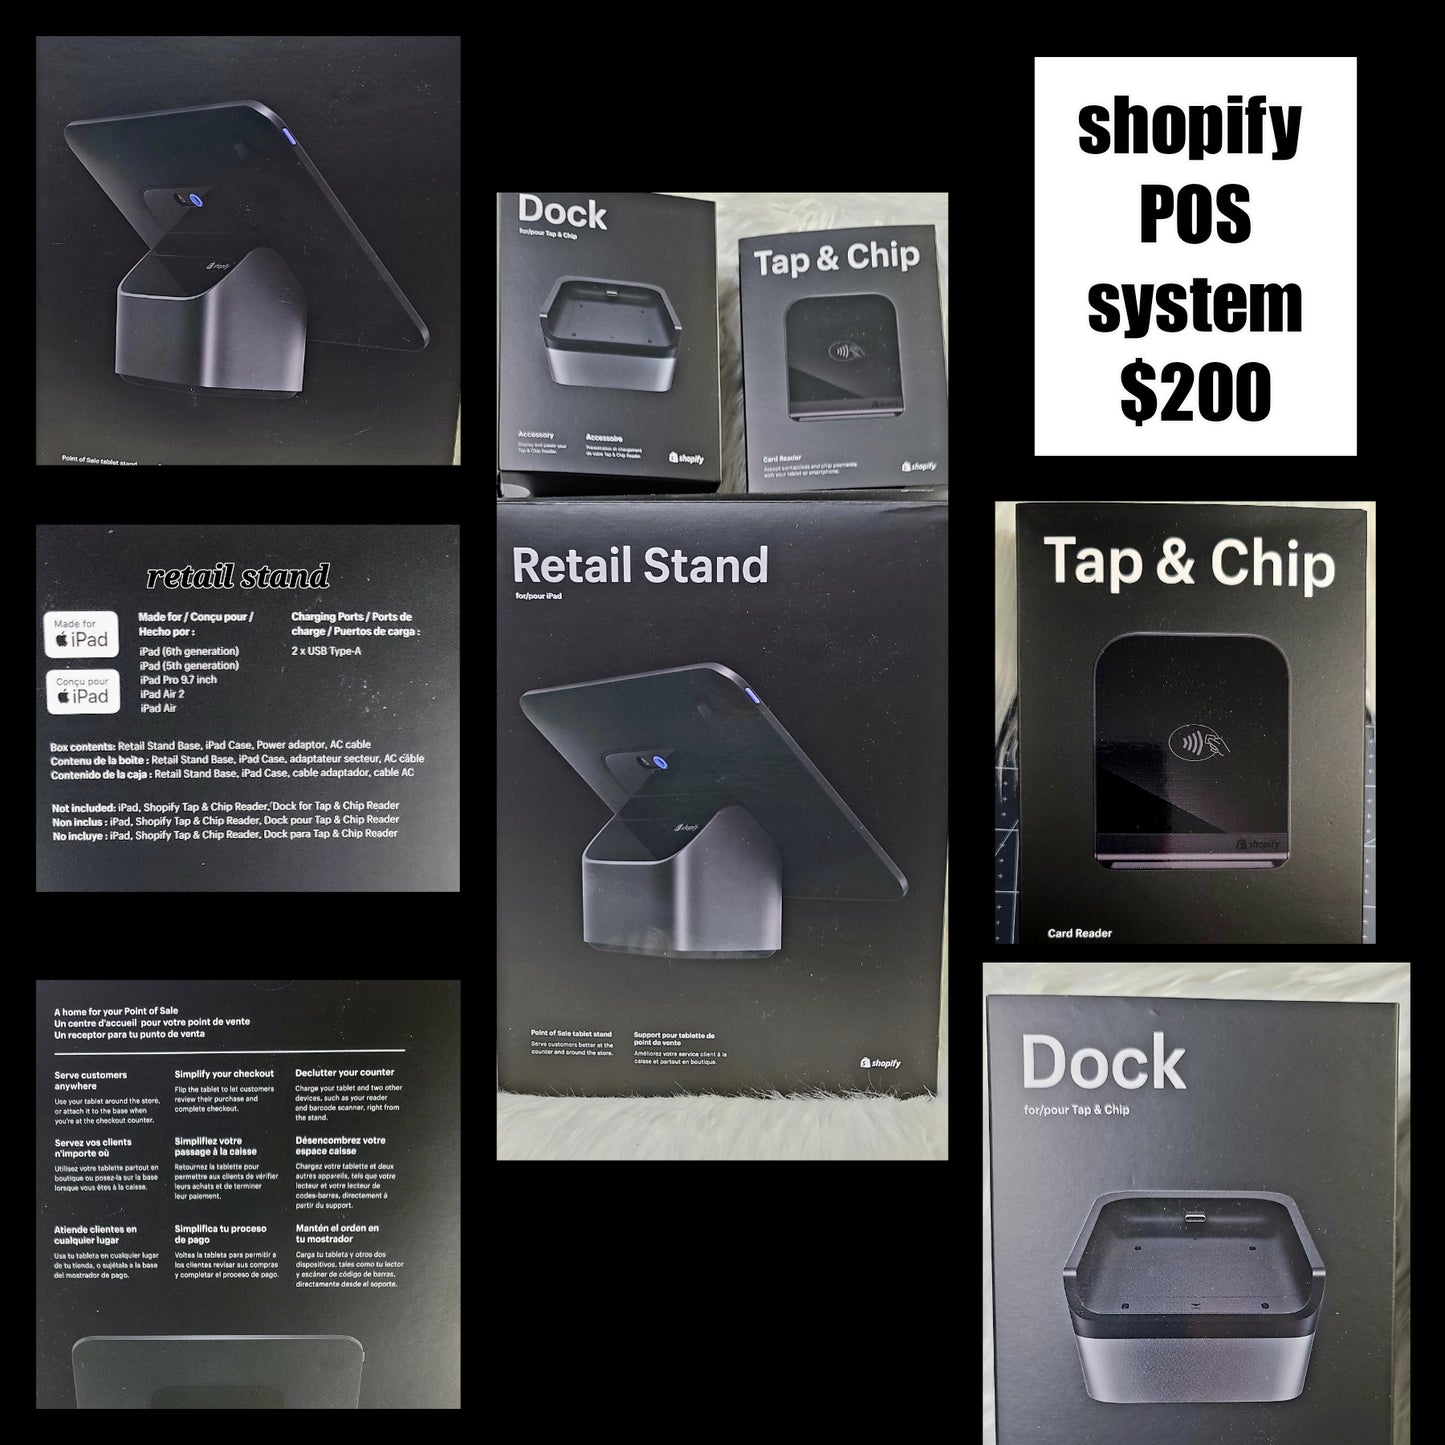 Shopify Retail POS system on sale